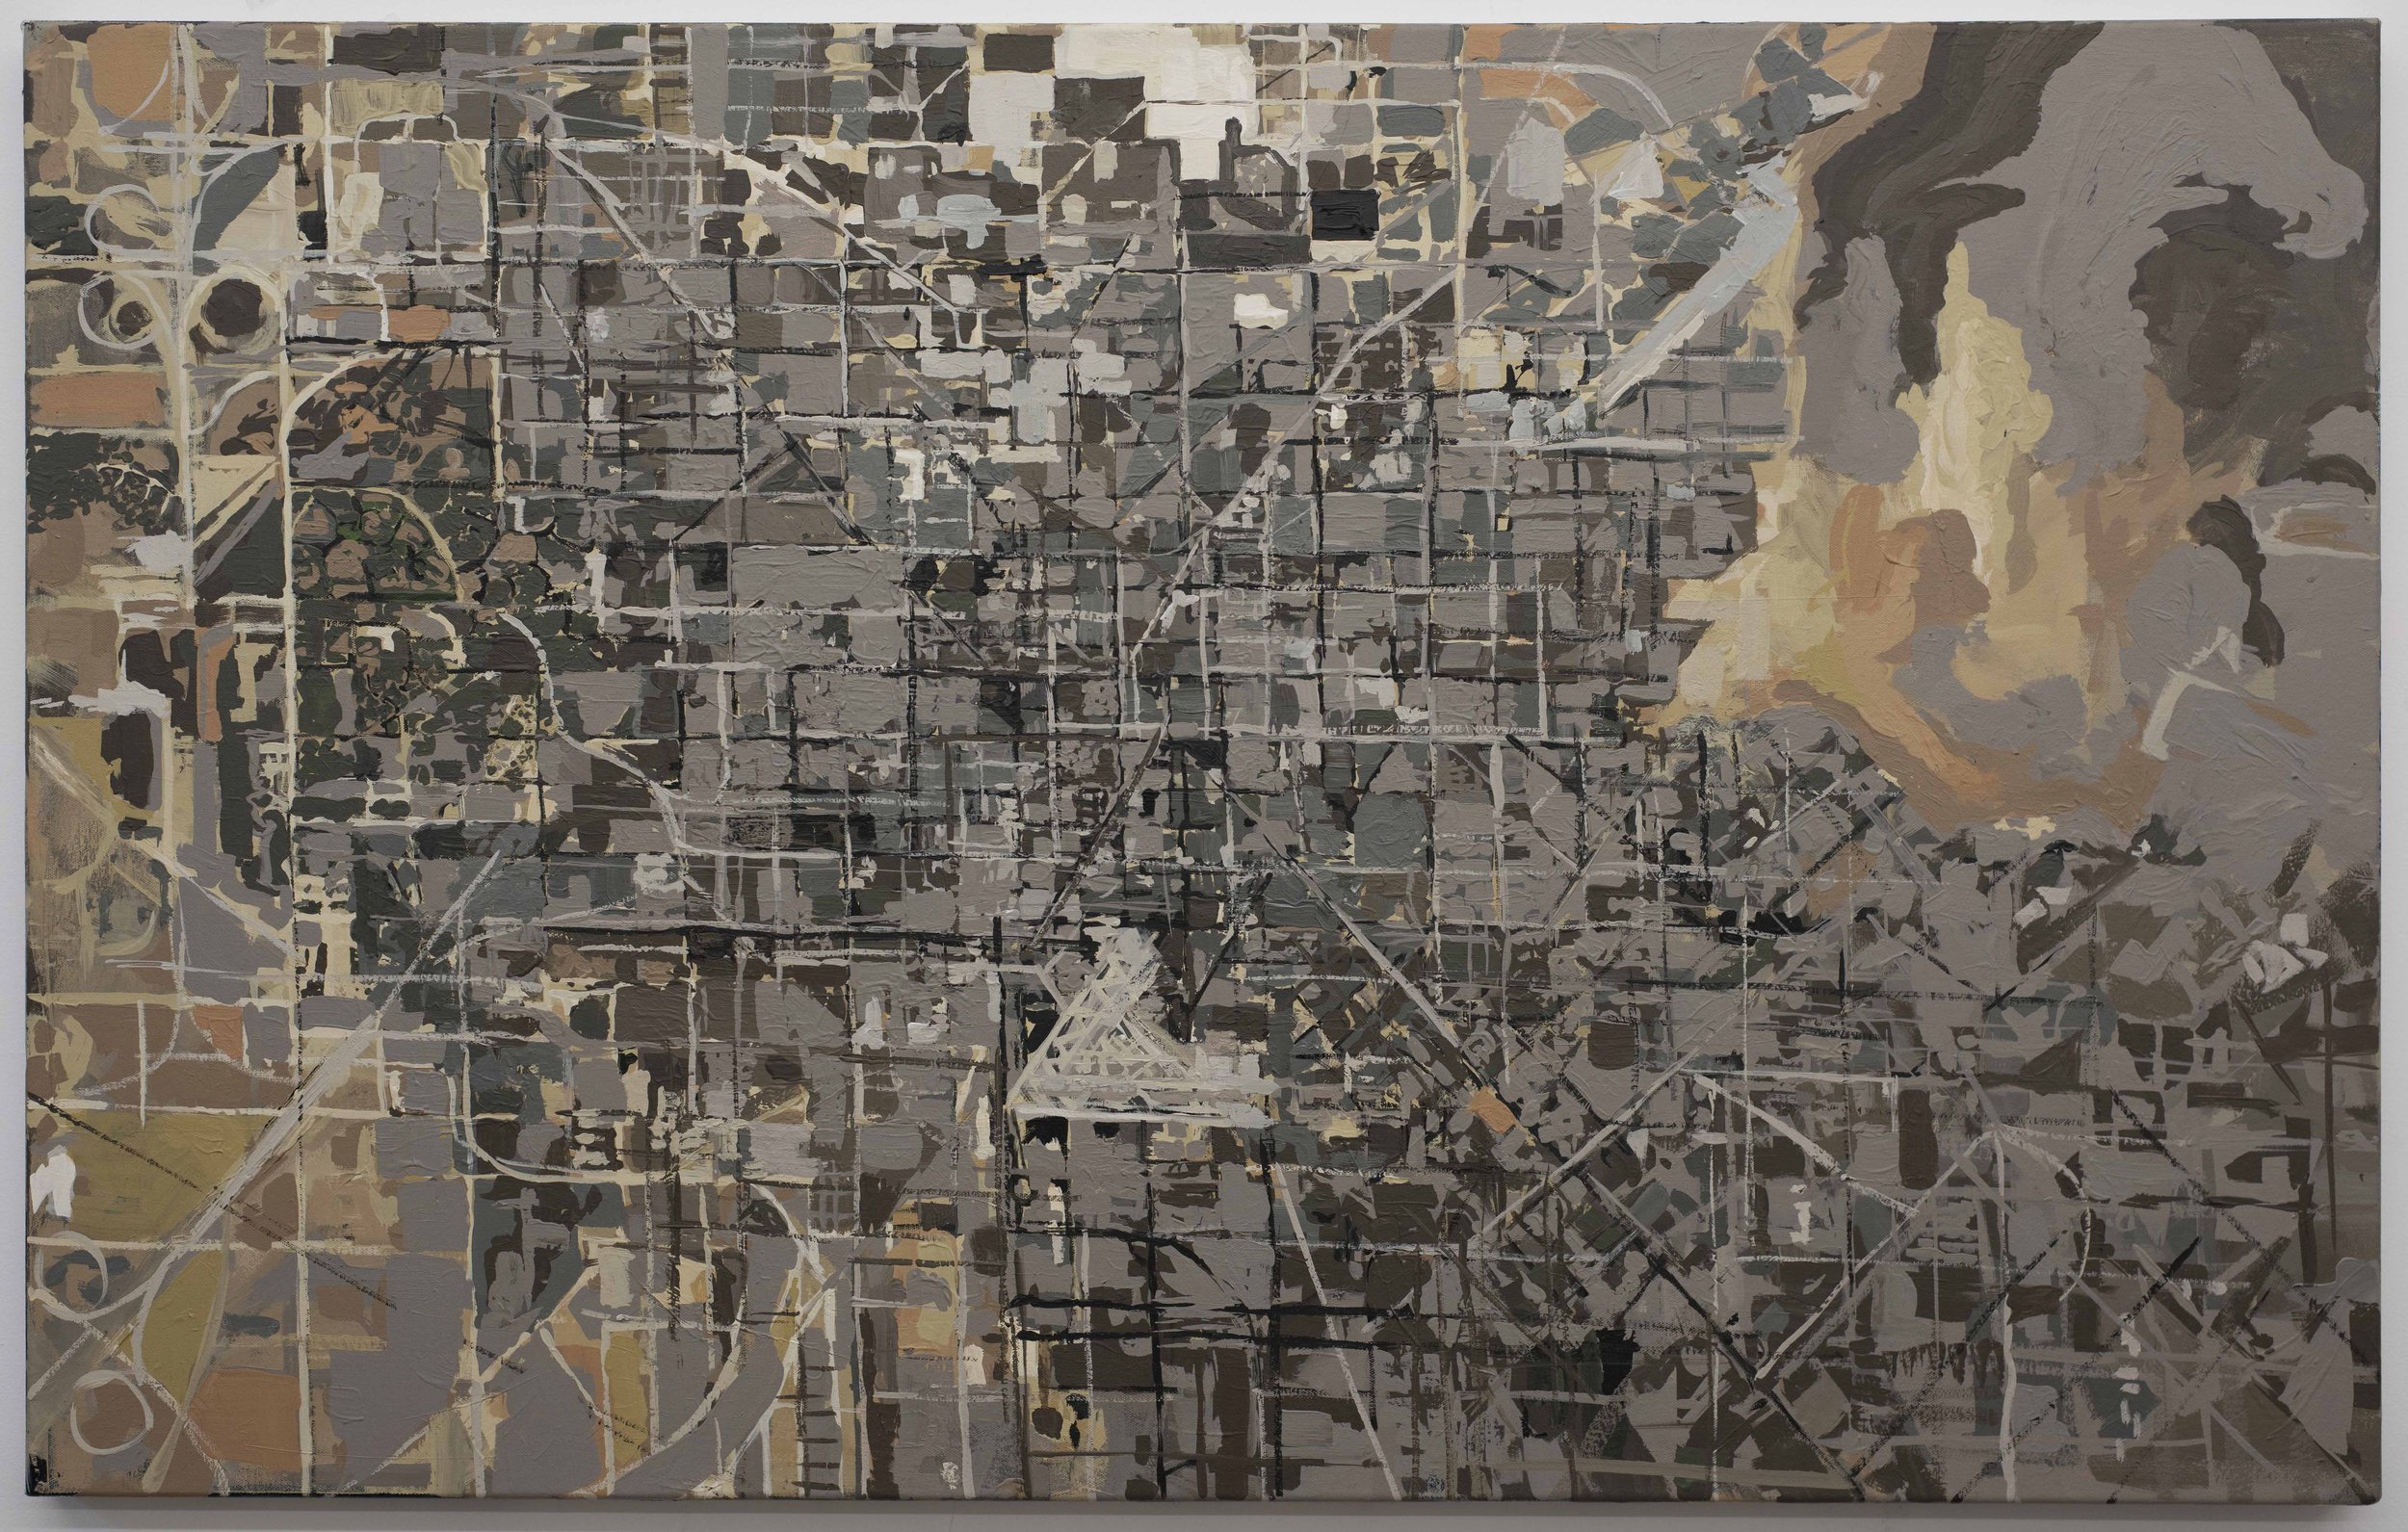  Aerial Landscape #2, acrylic on canvas, 30 x 48 inches, 2021 